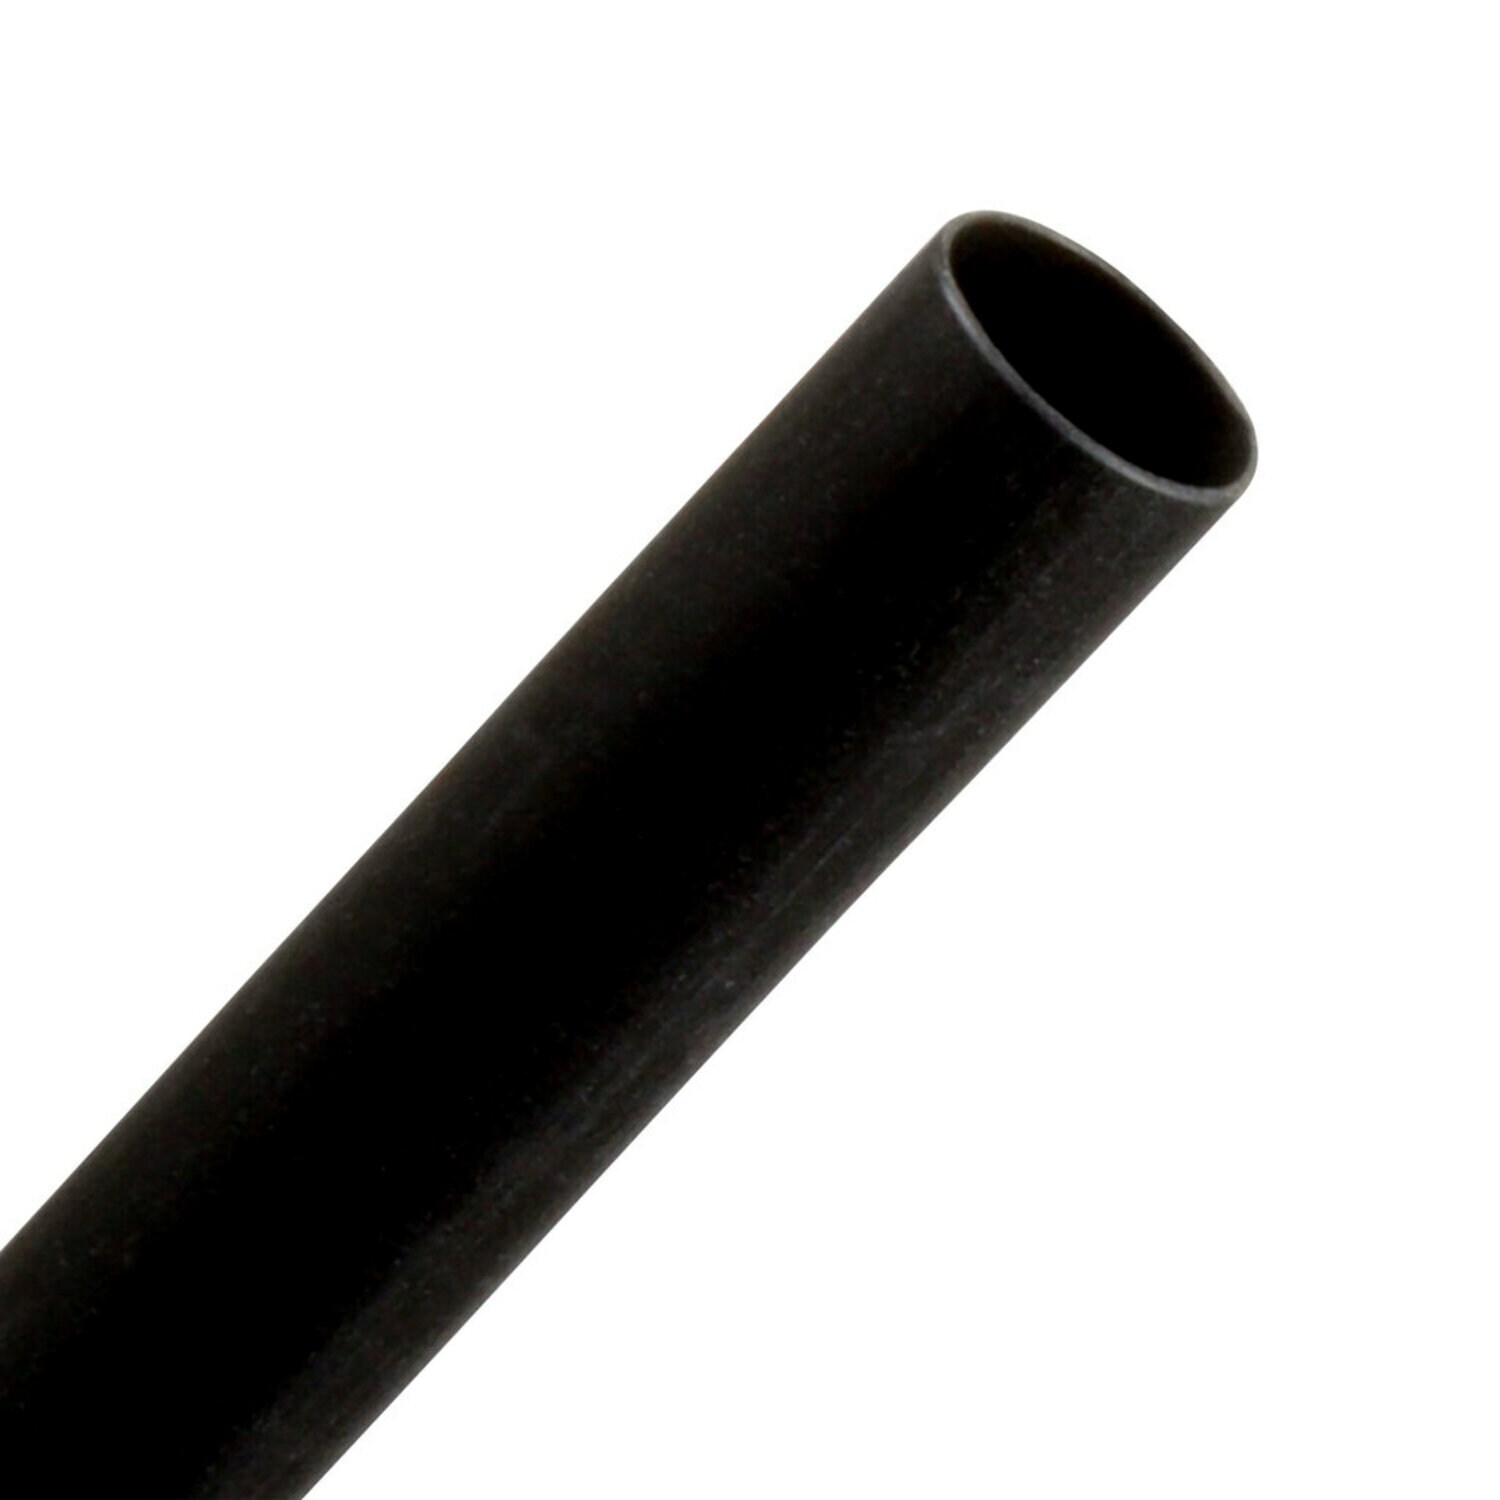 7100007366 - 3M Heat Shrink Thin-Wall Tubing FP-301-1/4-48"-Black-12 Pcs, 48 in
Length sticks, 12 pieces/case